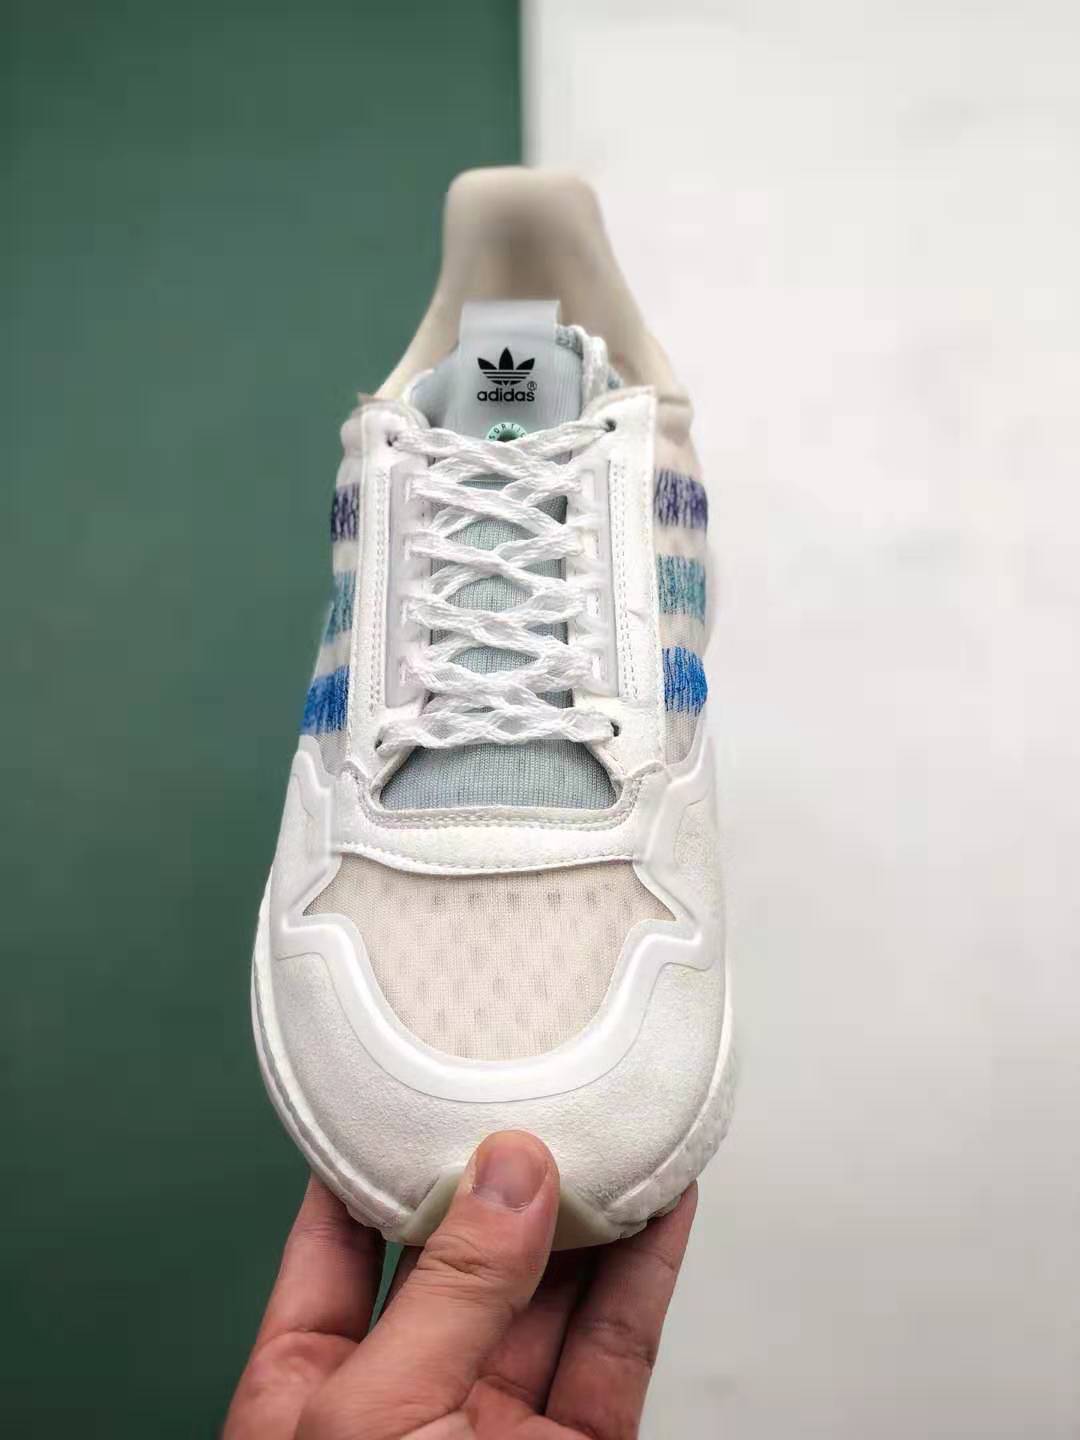 Adidas Commonwealth x ZX 500 RM 'Coastal Living' DB3510 - Stylish and Comfortable Sneakers